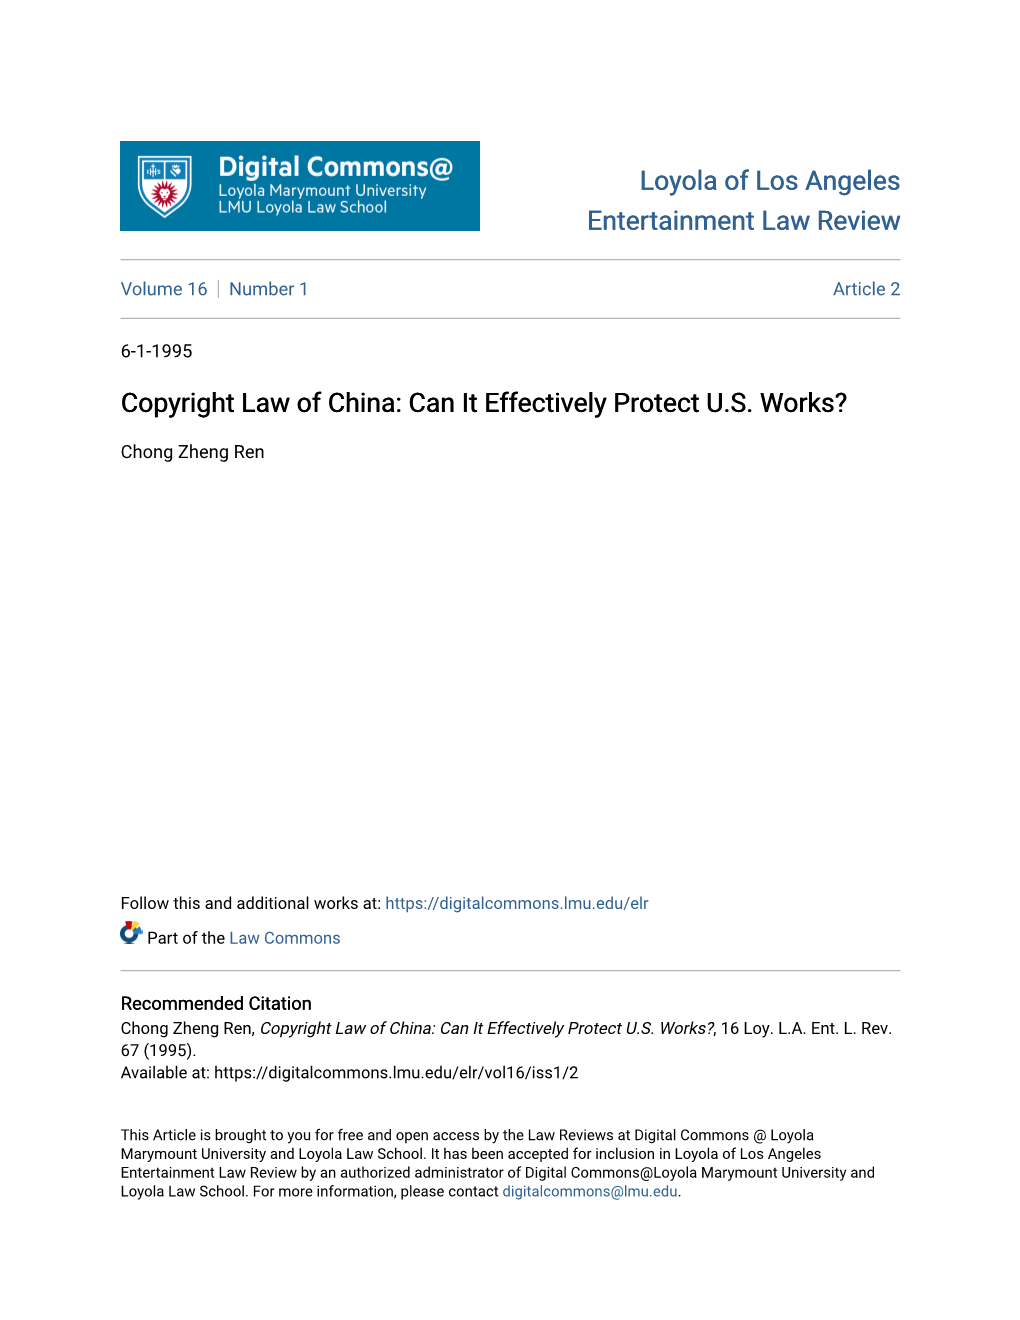 Copyright Law of China: Can It Effectively Protect U.S